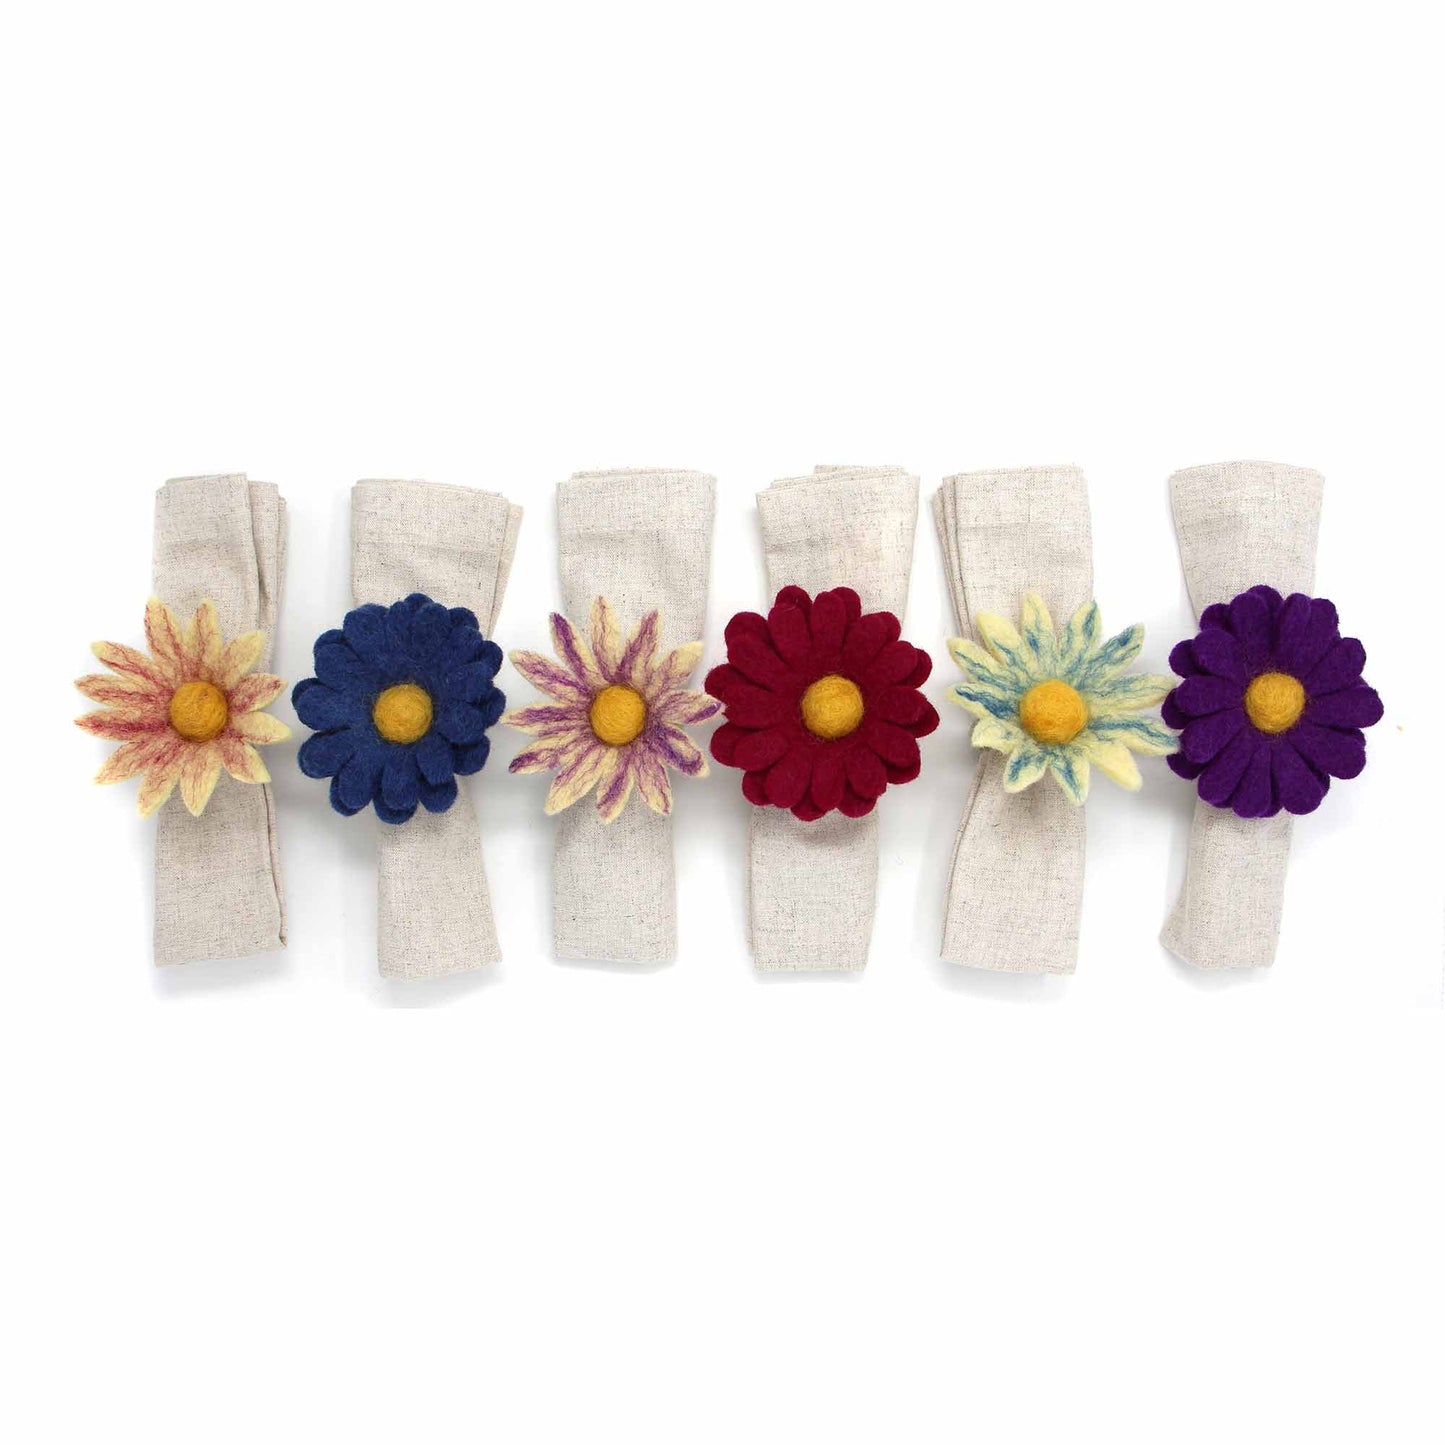 hand-crafted-felt-from-nepal-set-of-6-napkin-rings-assorted-daisies-for-fall